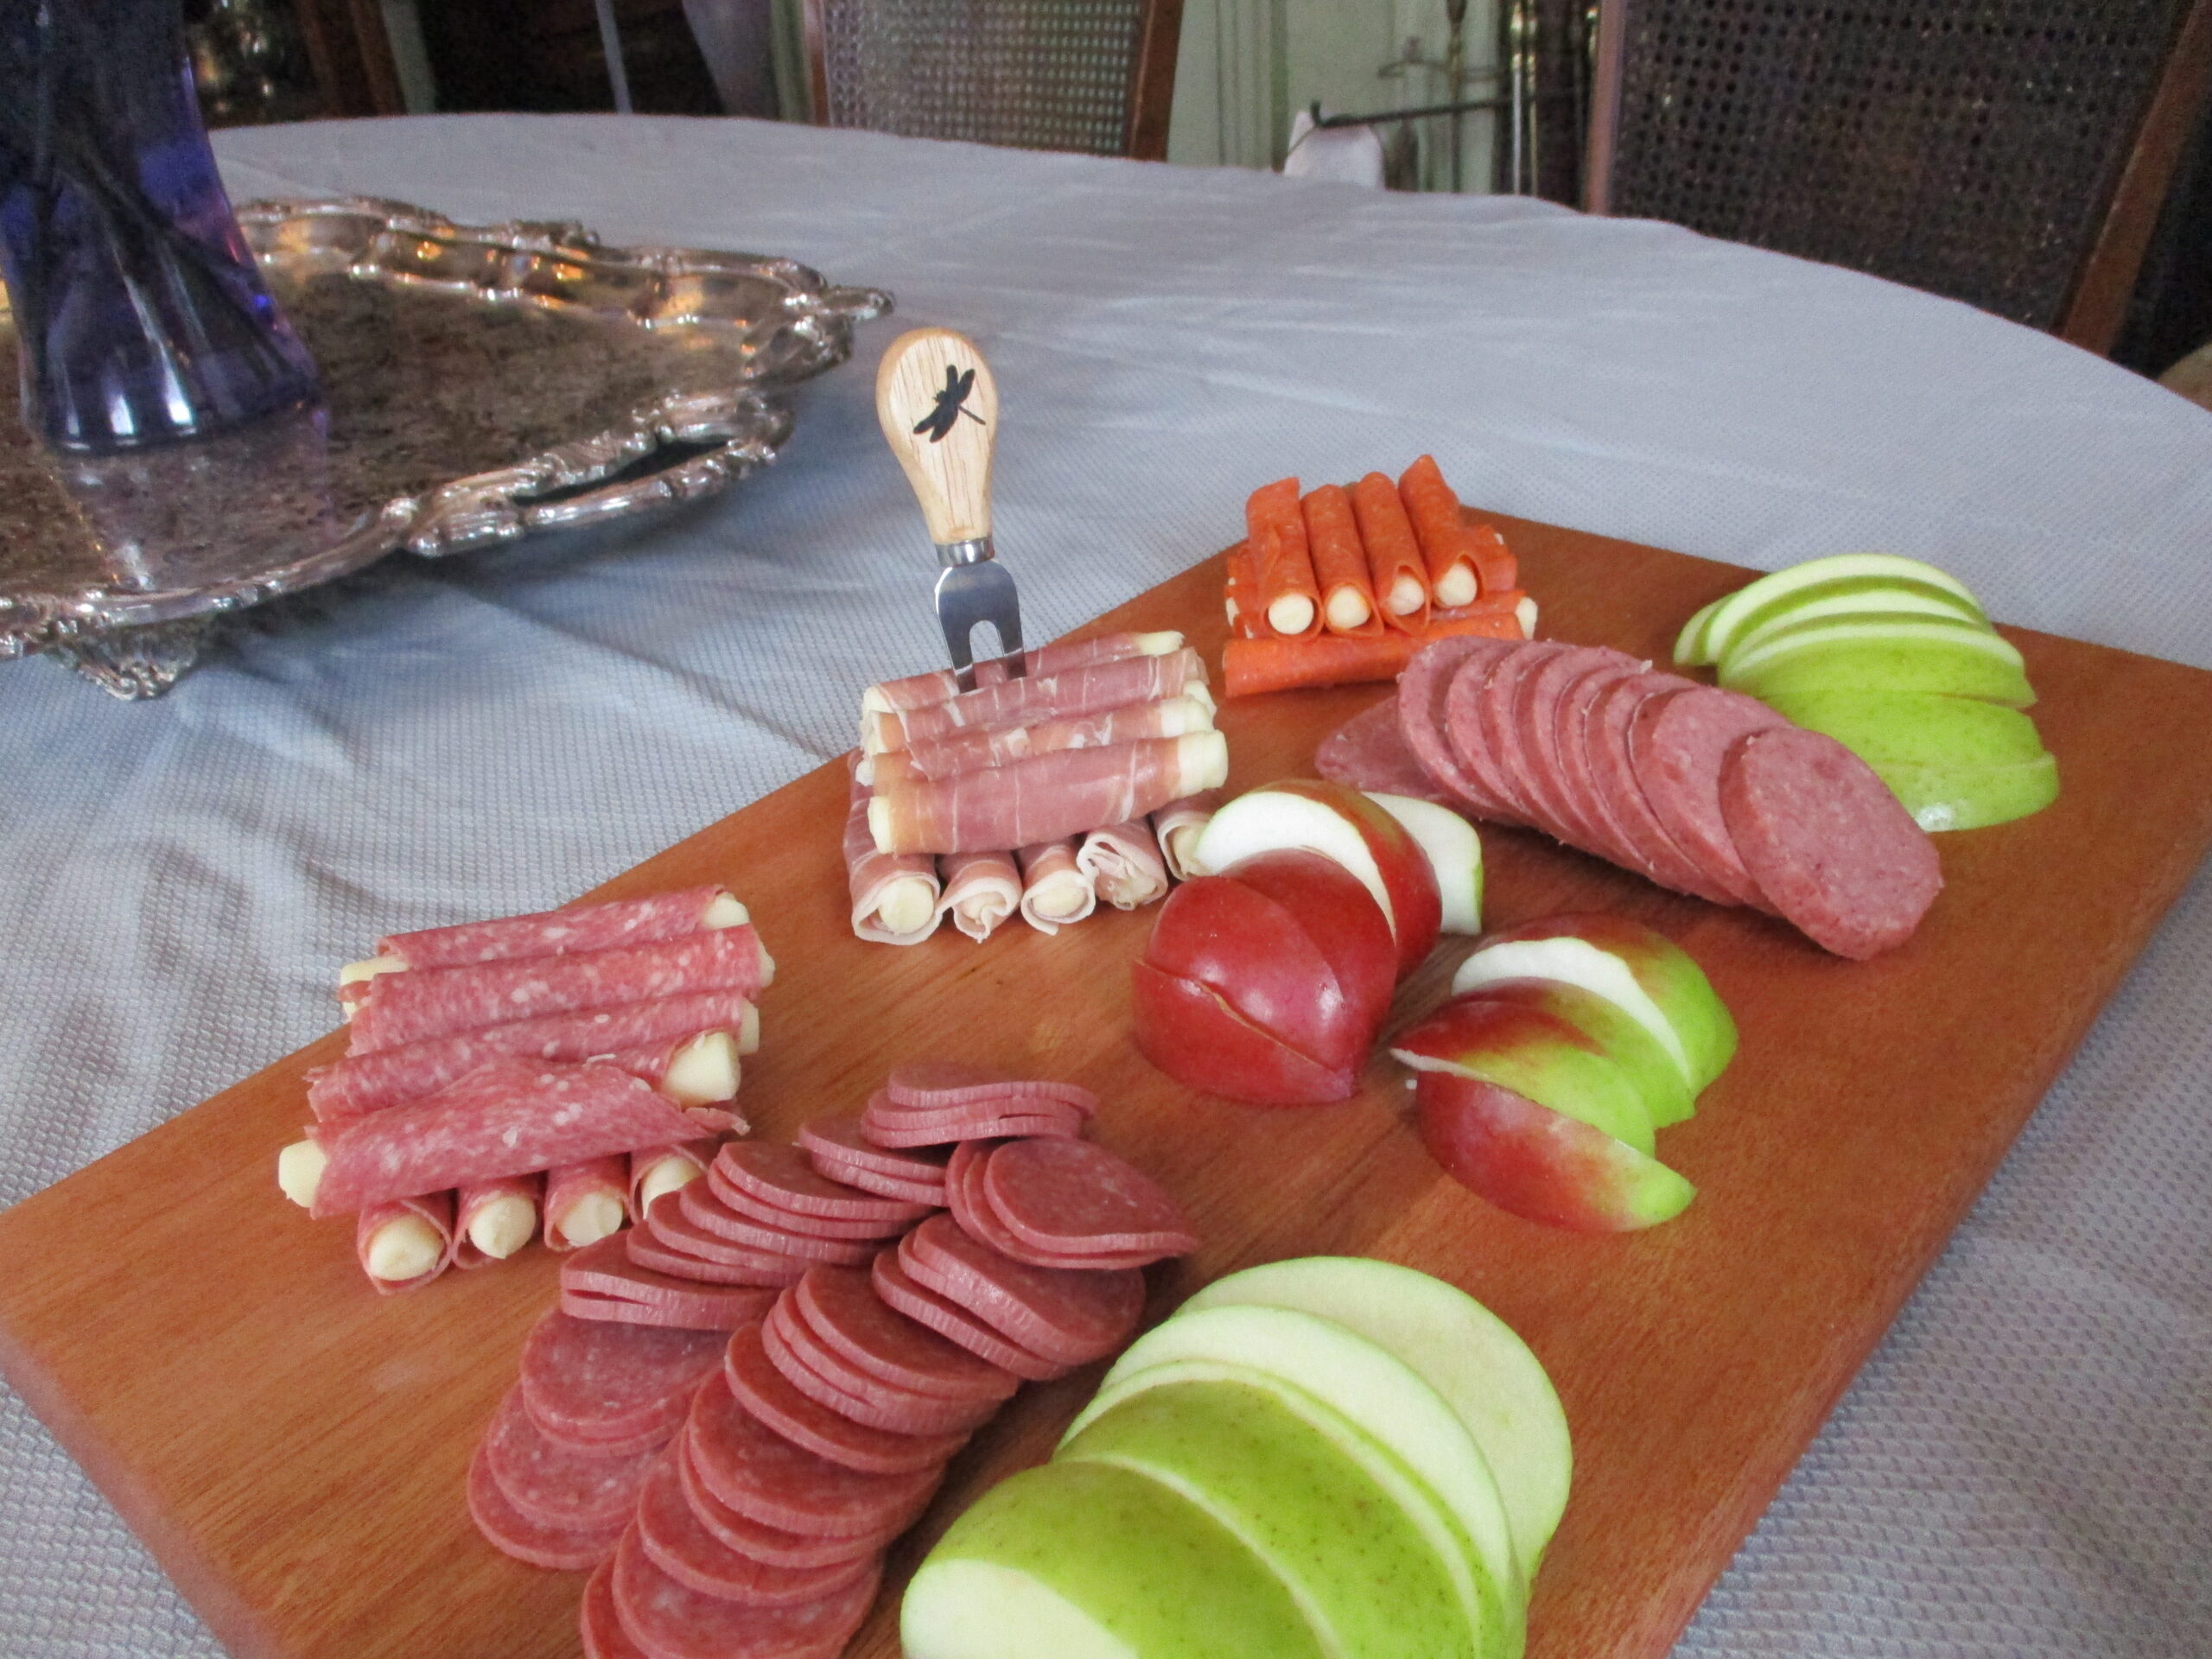 Custom Mahogany cutting board/charcuterie board as a housewarming gift pictured with fruit, cheese, and cured meats.